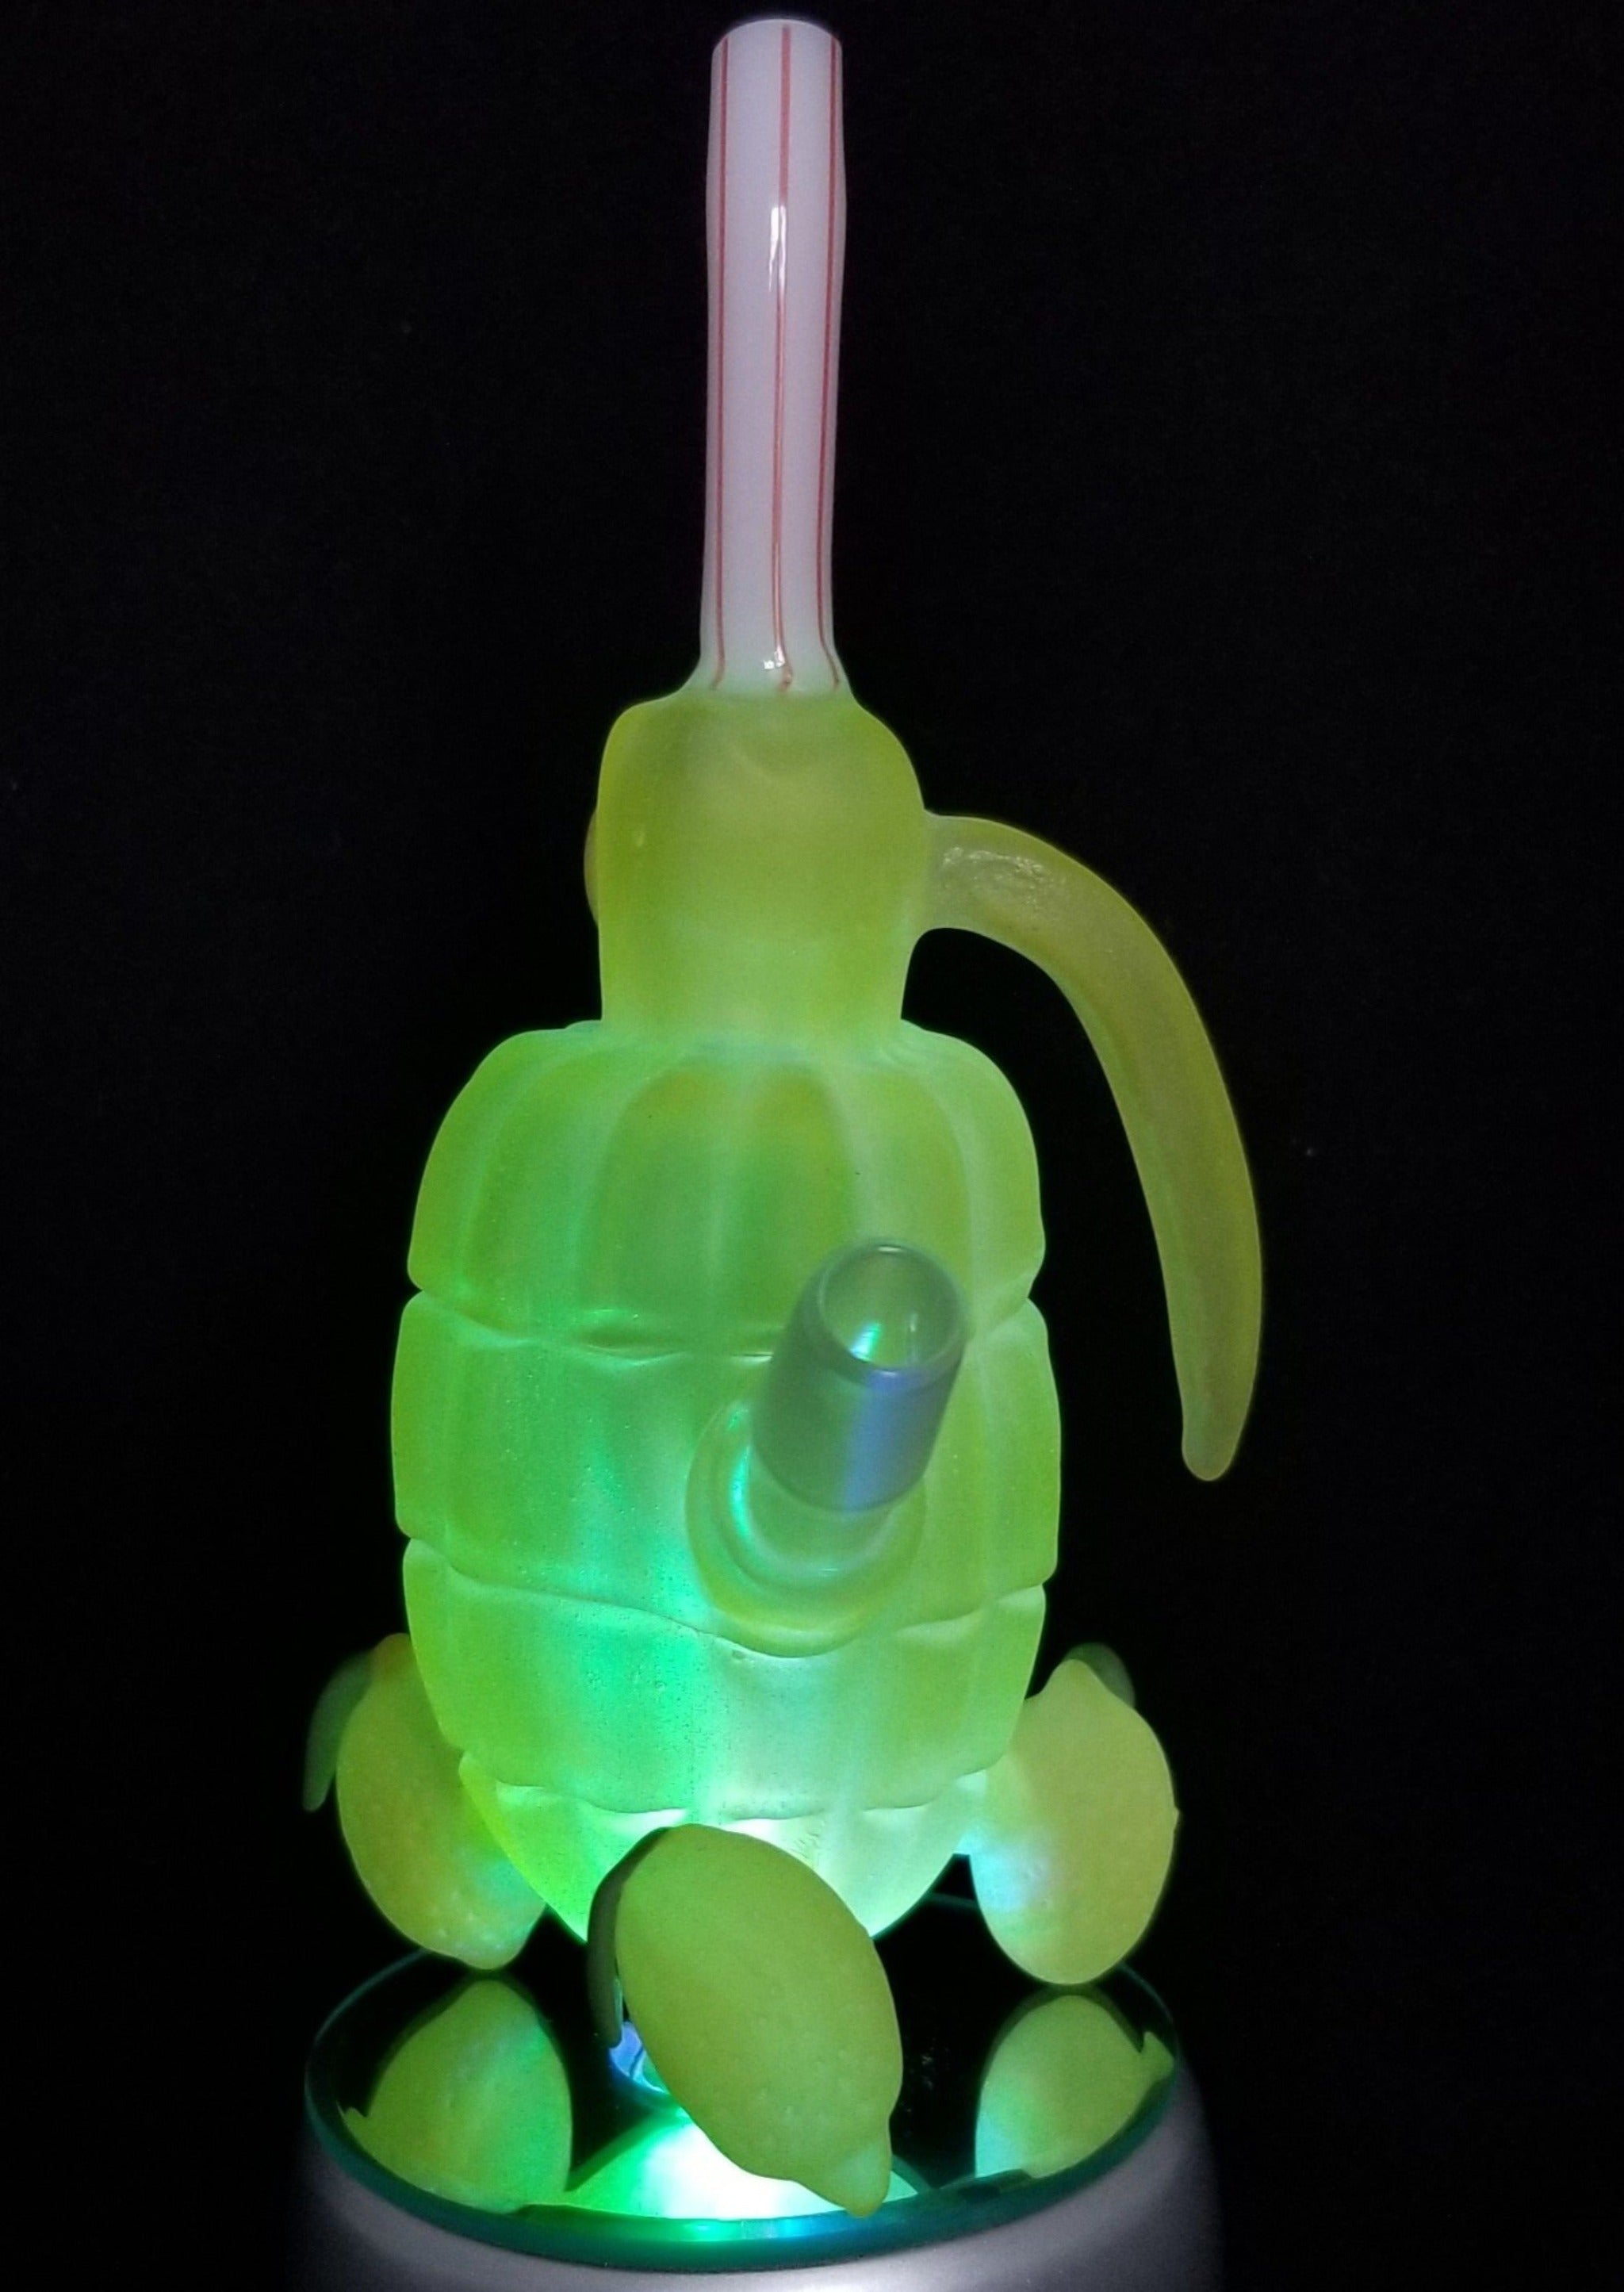 "Lemonade" by Digger Glass 14 mm male